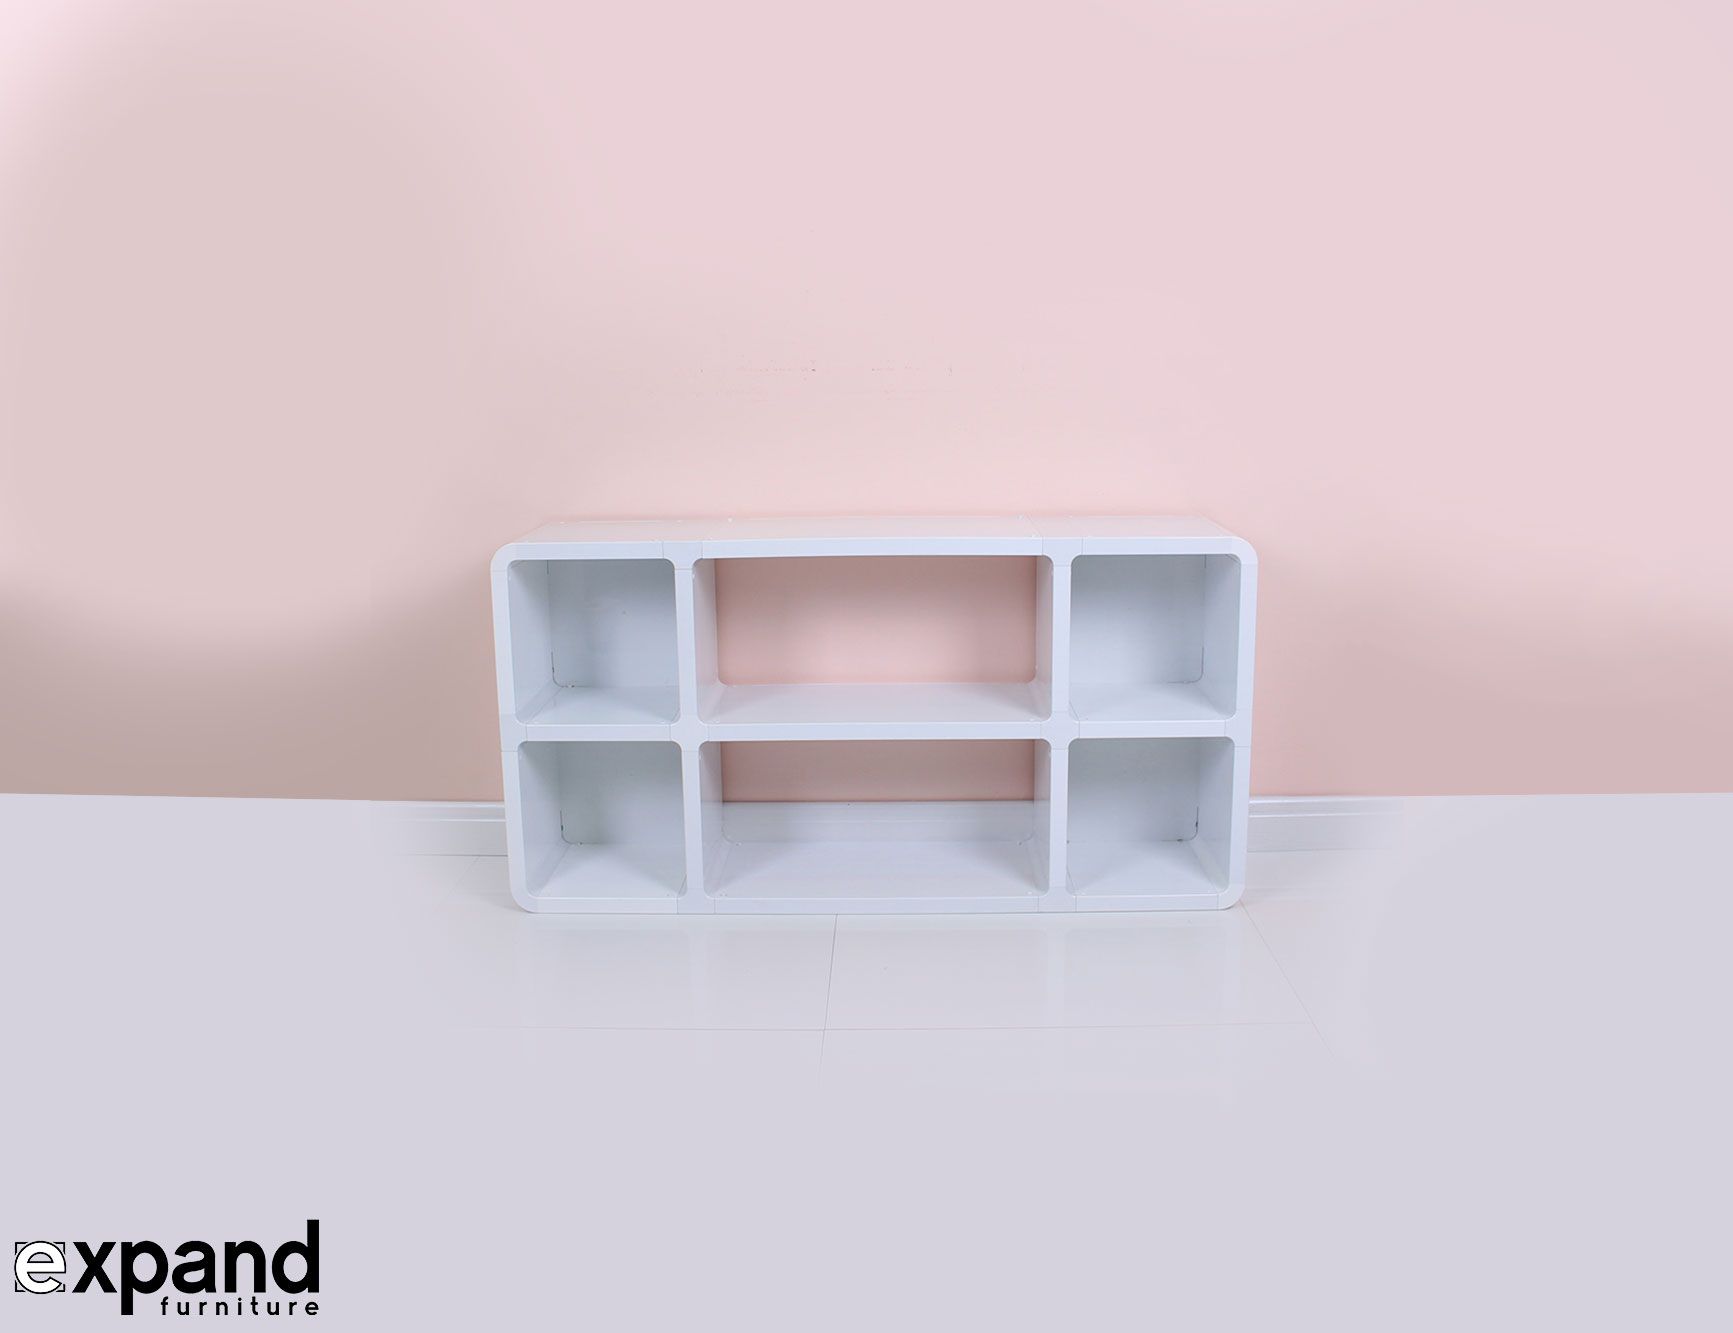 Slim Modern Tv Stand | Expand Furniture In Slimline Tv Stands (View 9 of 15)